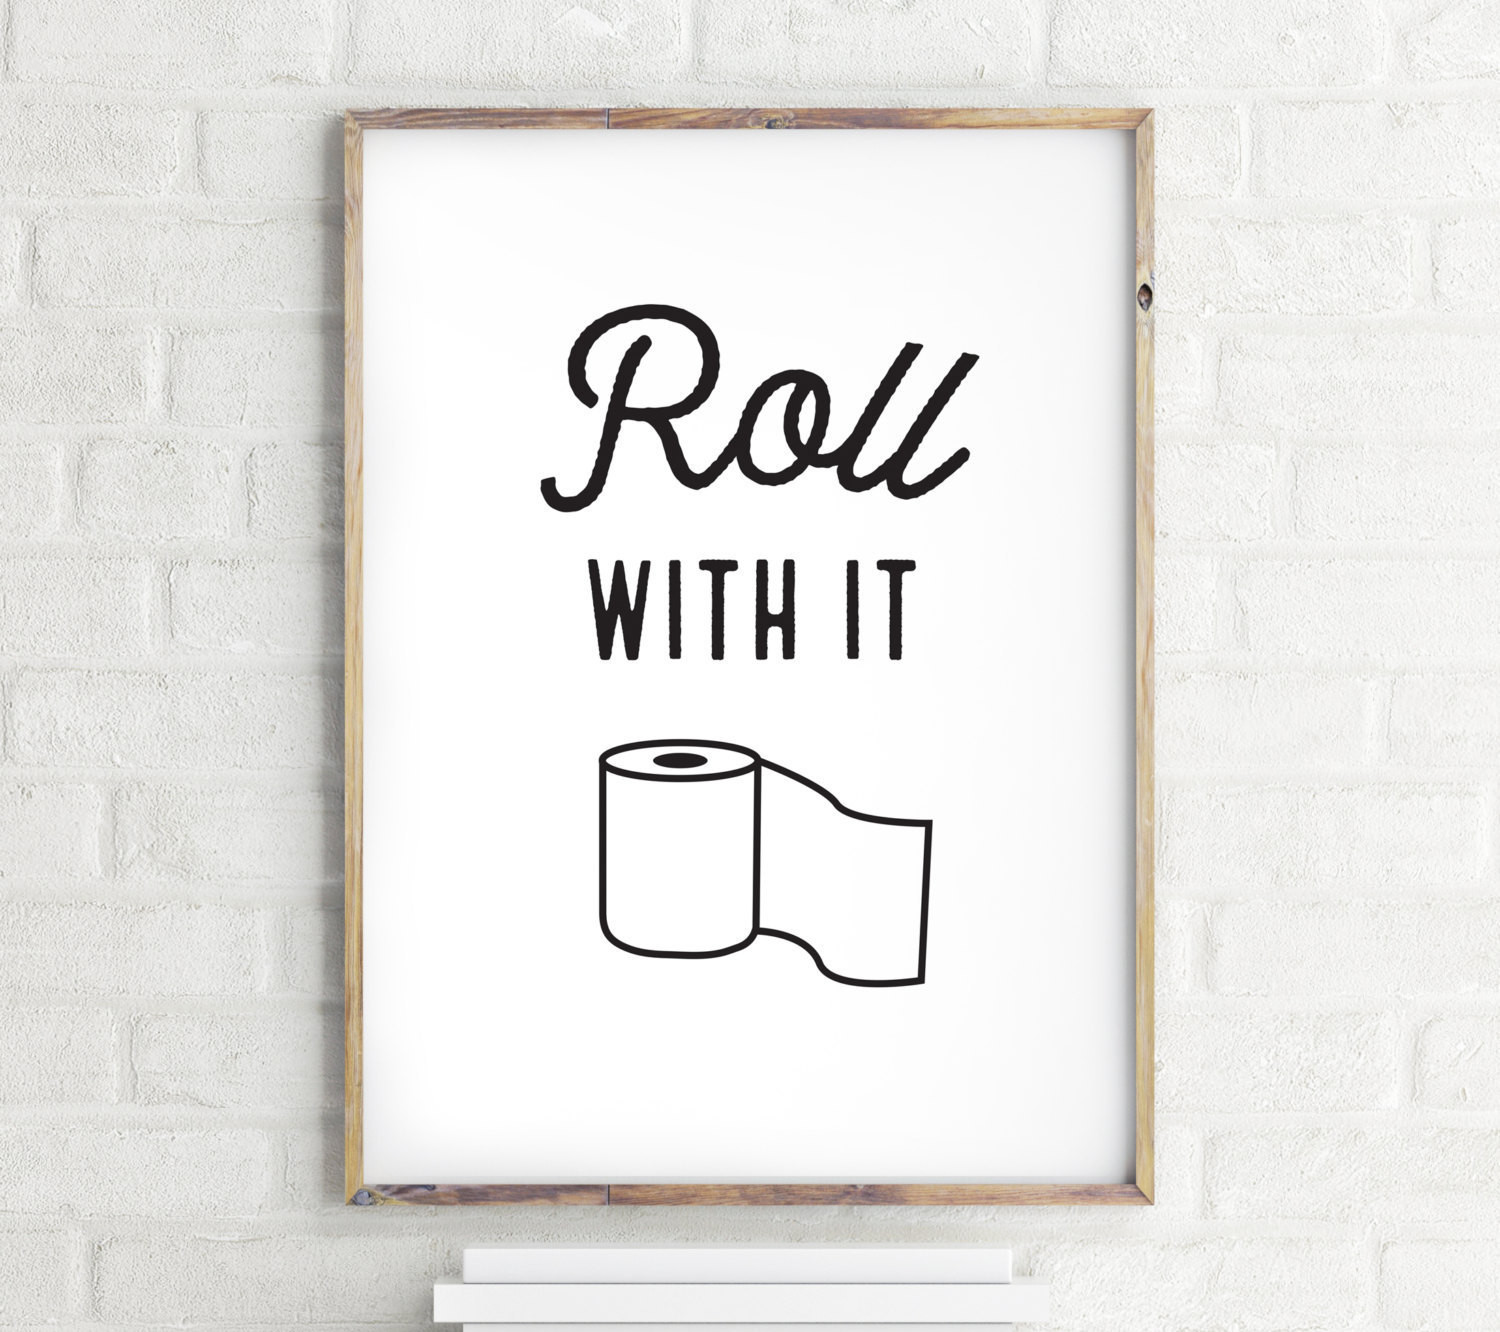 Funny Bathroom Wall Art
 Roll With It Funny Bathroom Wall Art Bathroom Wall Decor